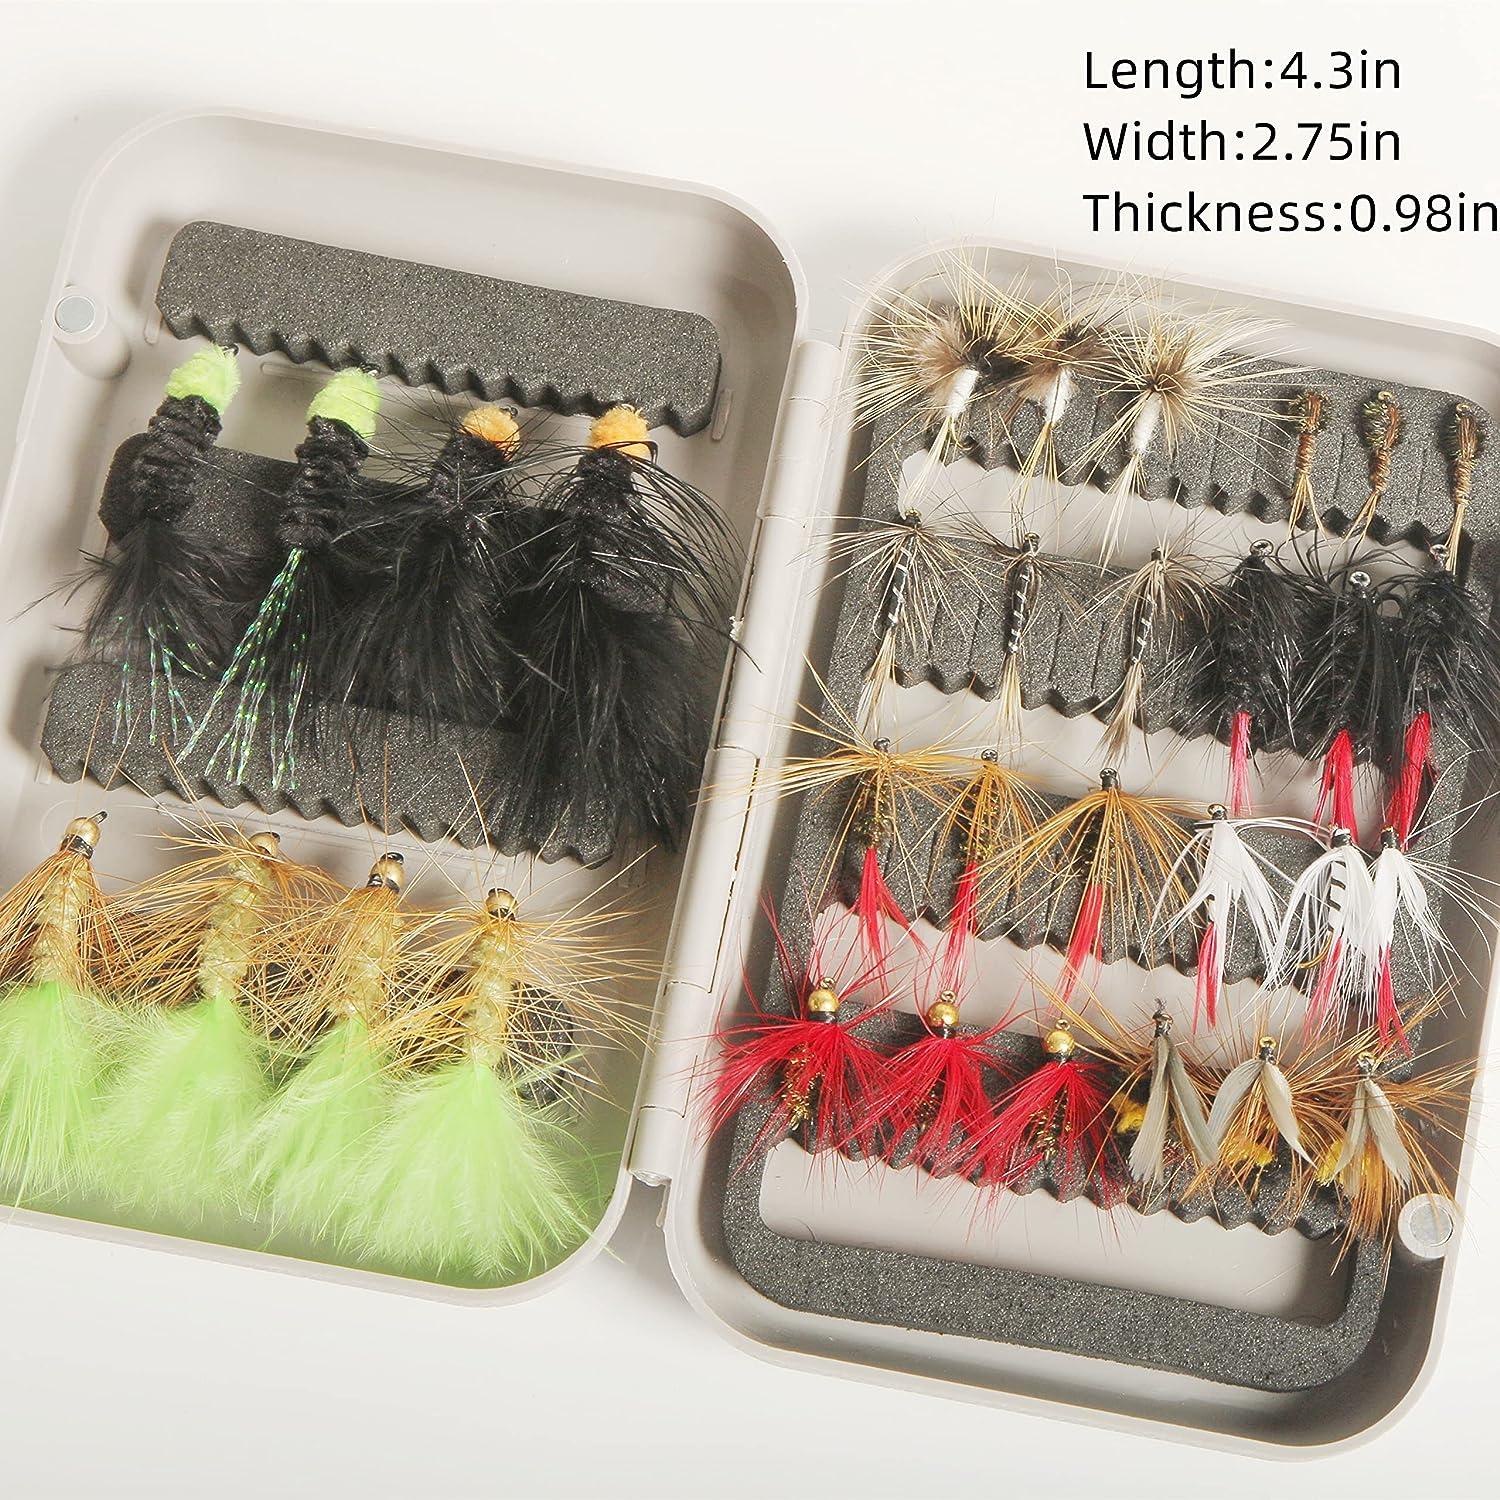 Guide’s Stash Fly Fishing Flies Kit | Assortment of 48 Hand Tied Flies for Fly Fishing | Includes Fly Casting Secrets Mini Class | Guide-Quality Fly